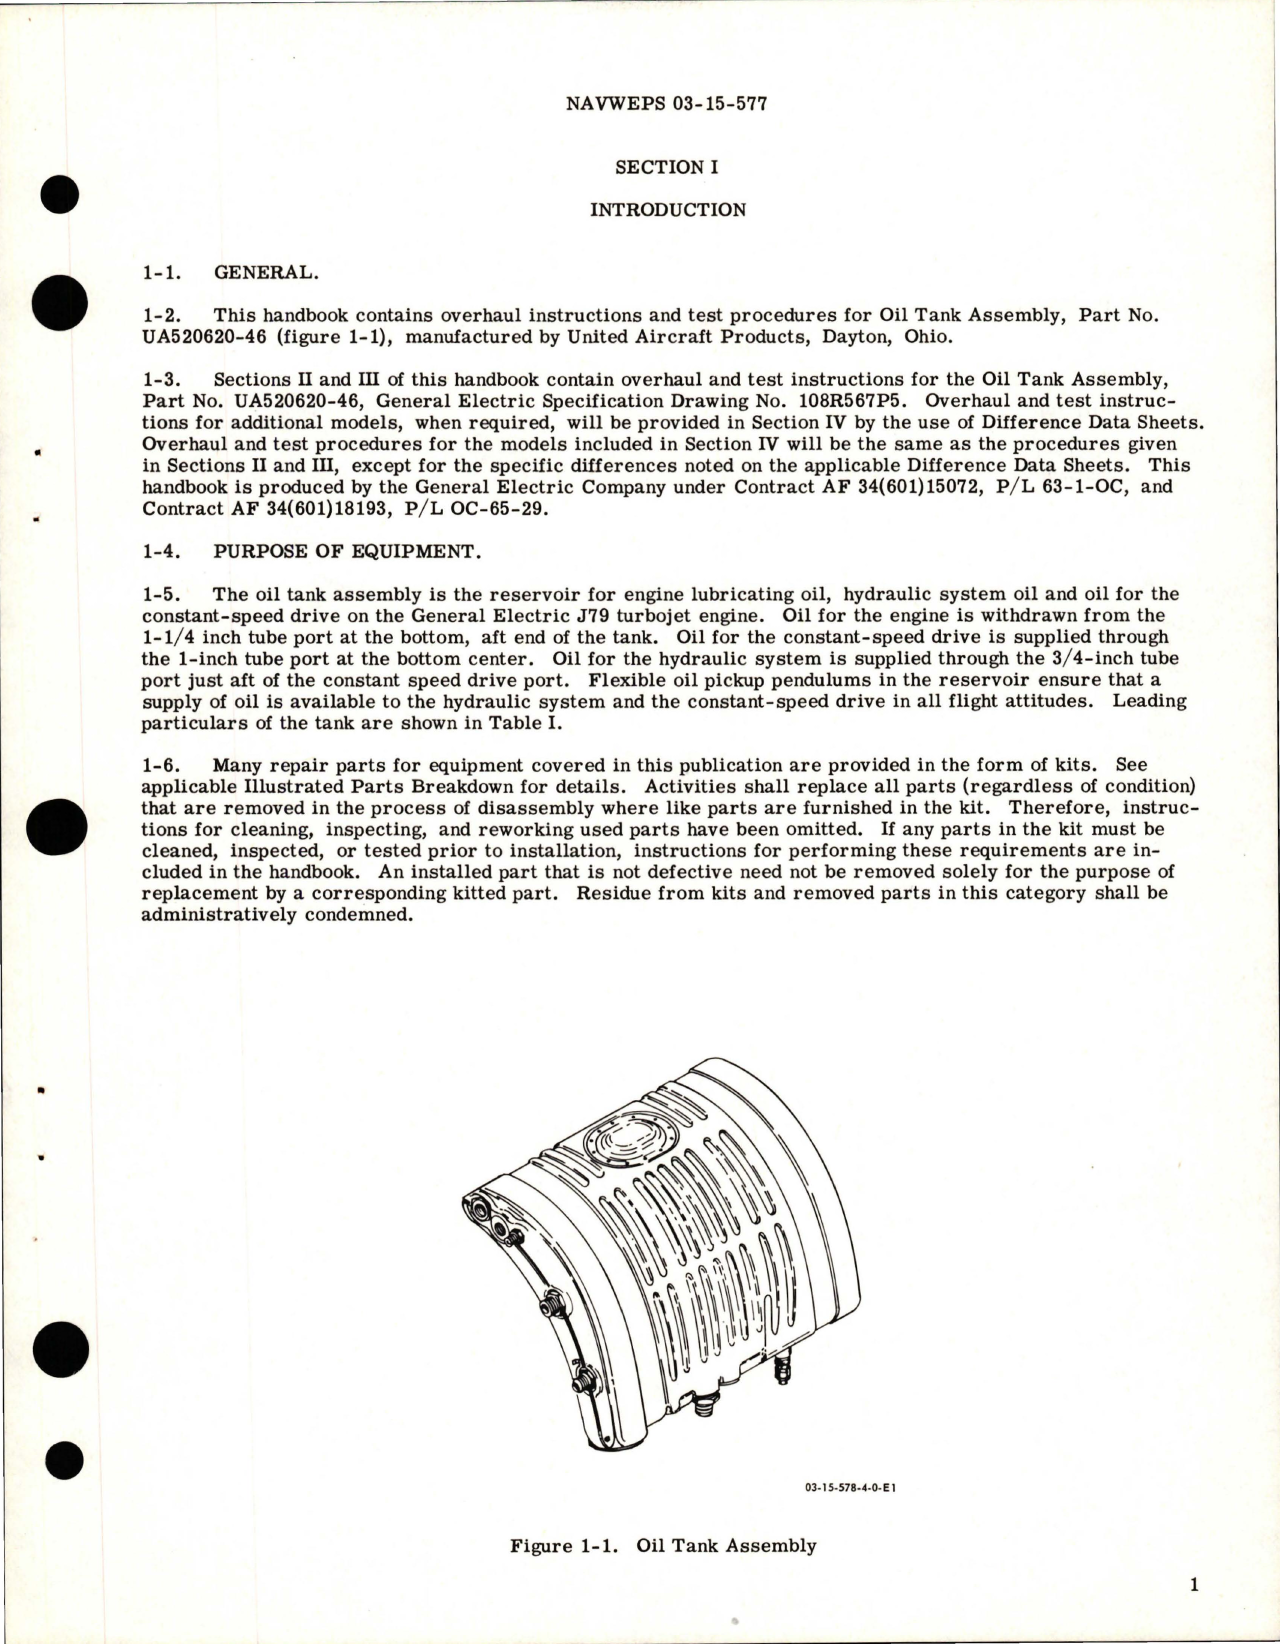 Sample page 5 from AirCorps Library document: Overhaul Instructions for Oil Tank Assembly